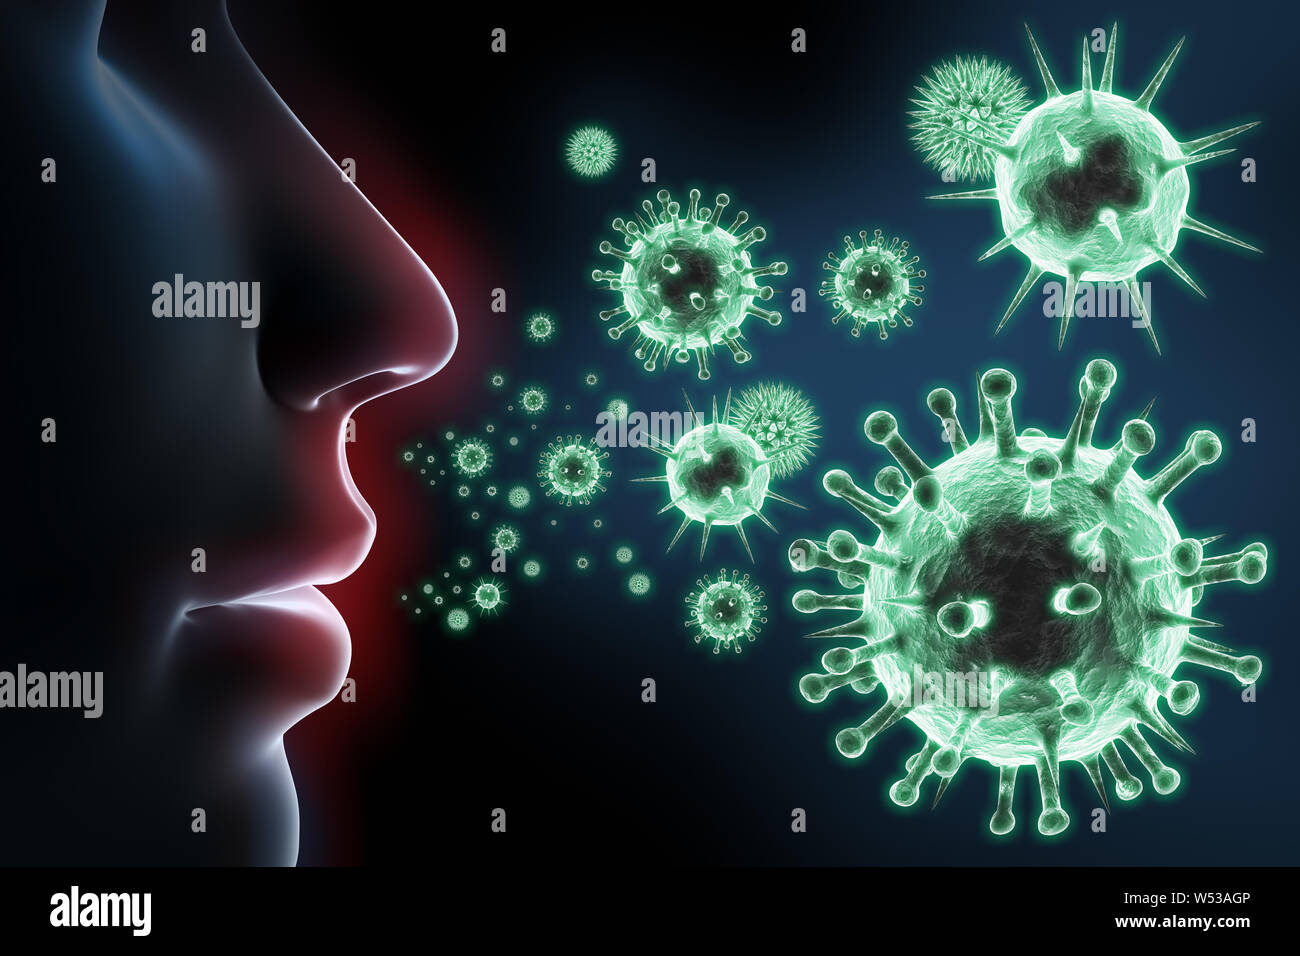 Visual concept of immune system and defense - 3D illustration Stock Photo